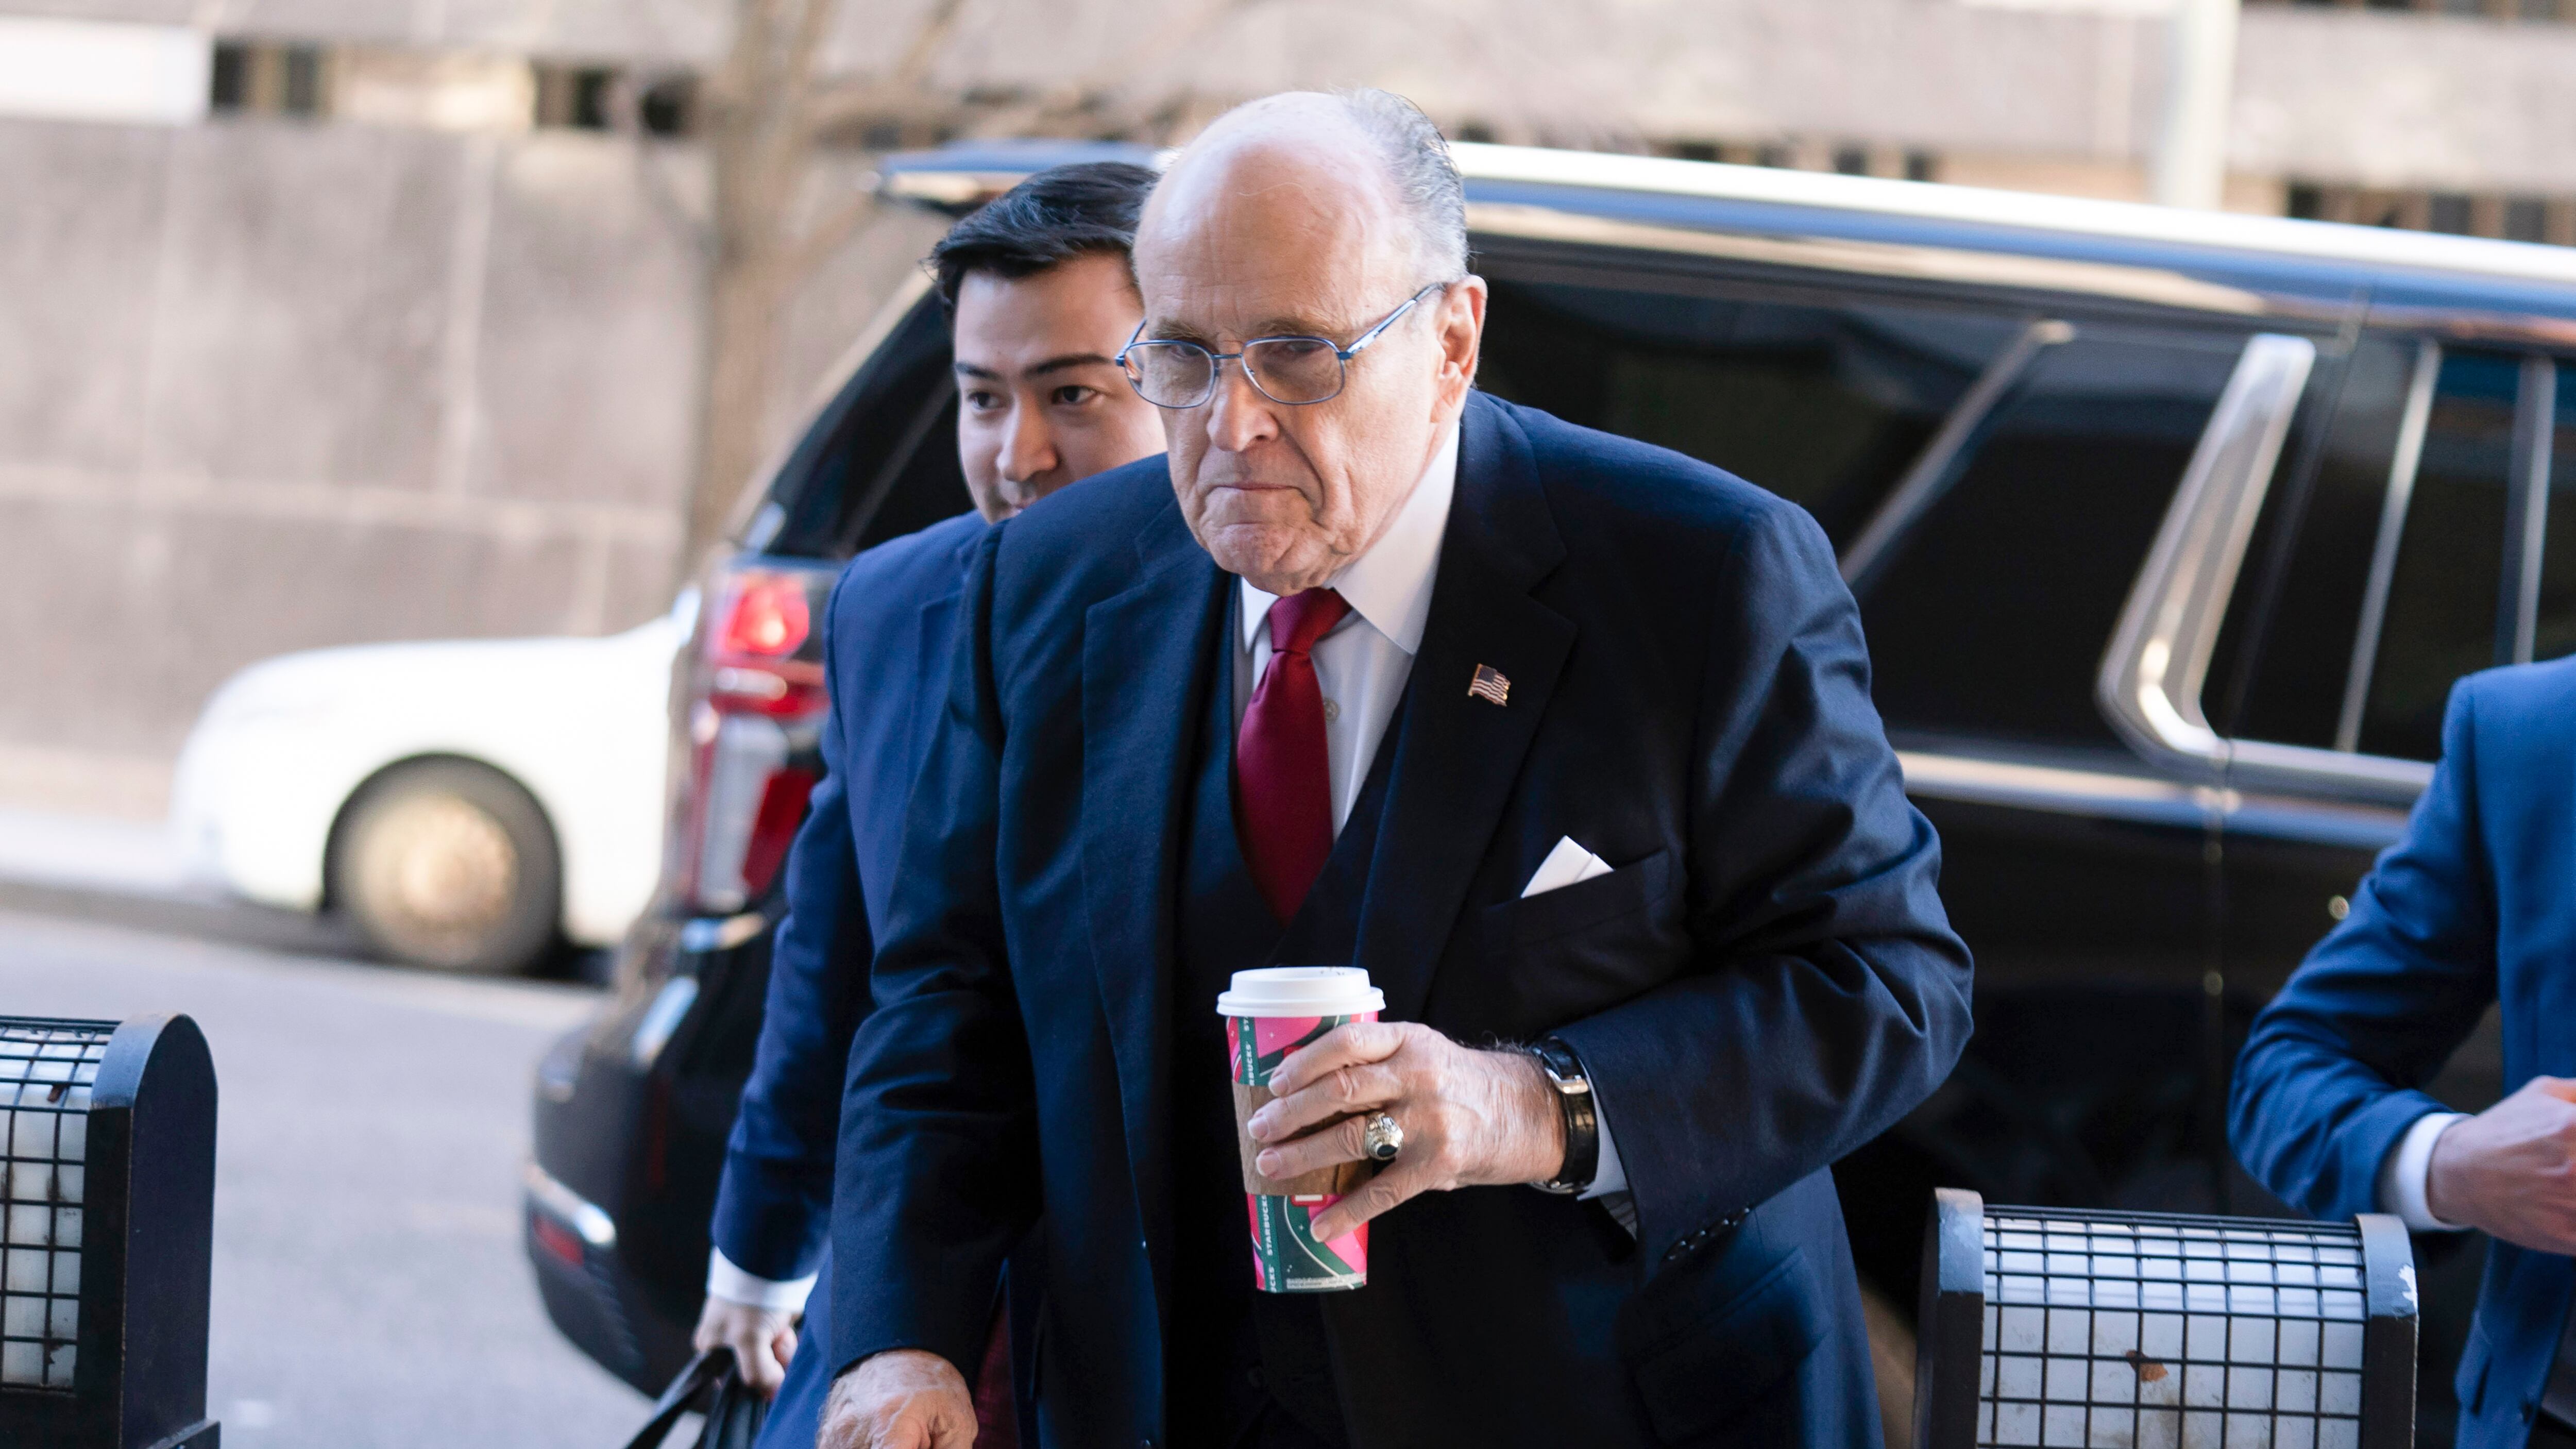 Former mayor of New York Rudy Giuliani arrives at the federal court in Washington on Friday (Jose Luis Magana/AP)